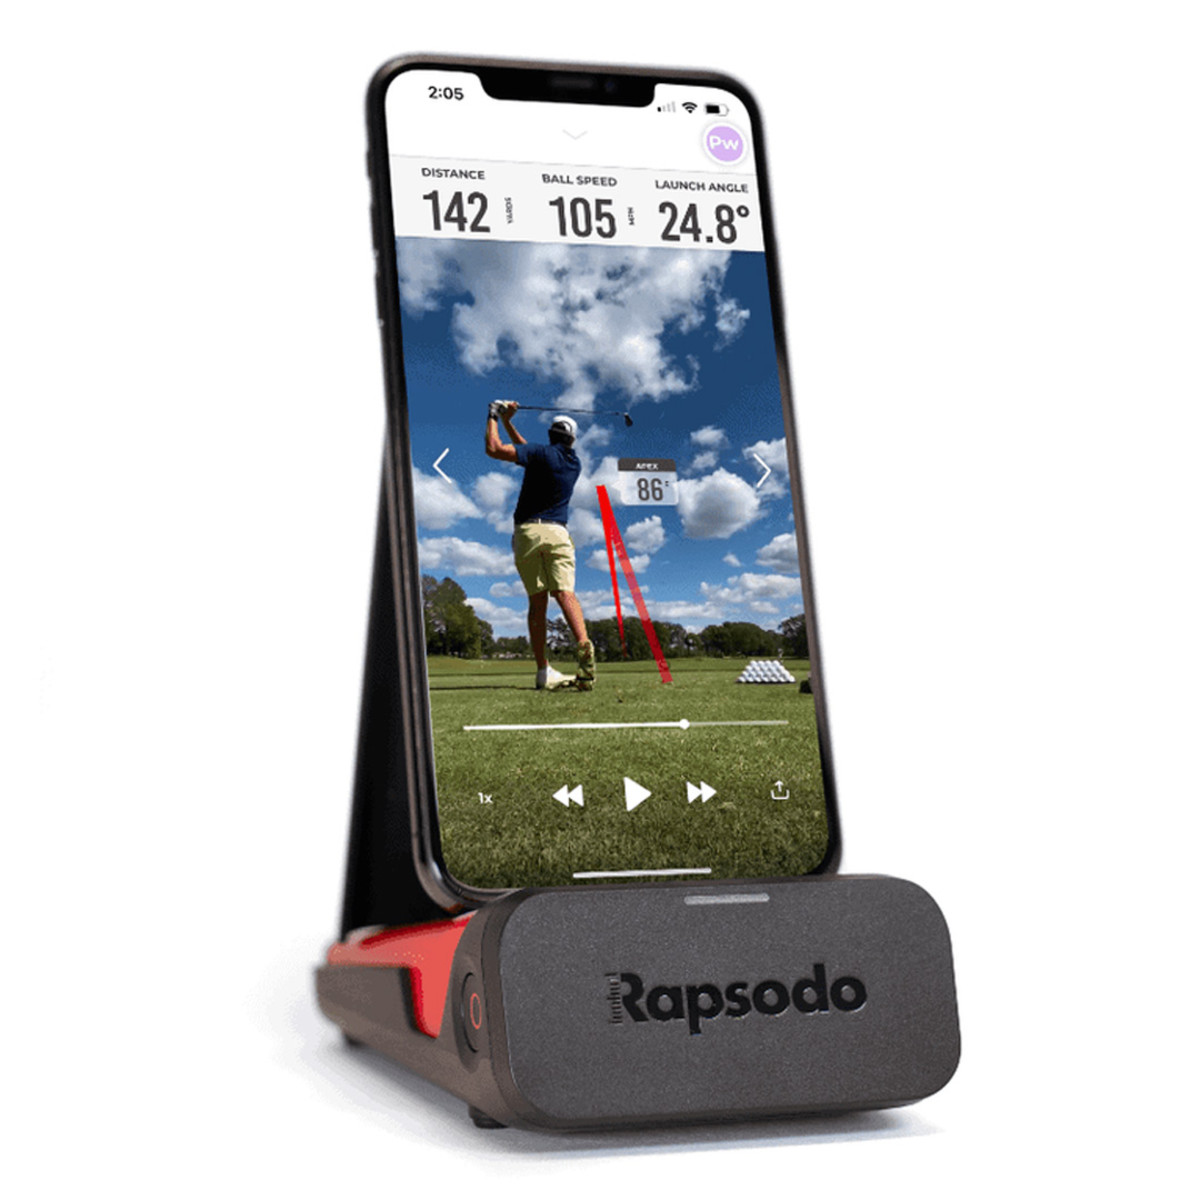 the rapsodo mobile launch monitor, seen here, is on sale at pga tour superstore.